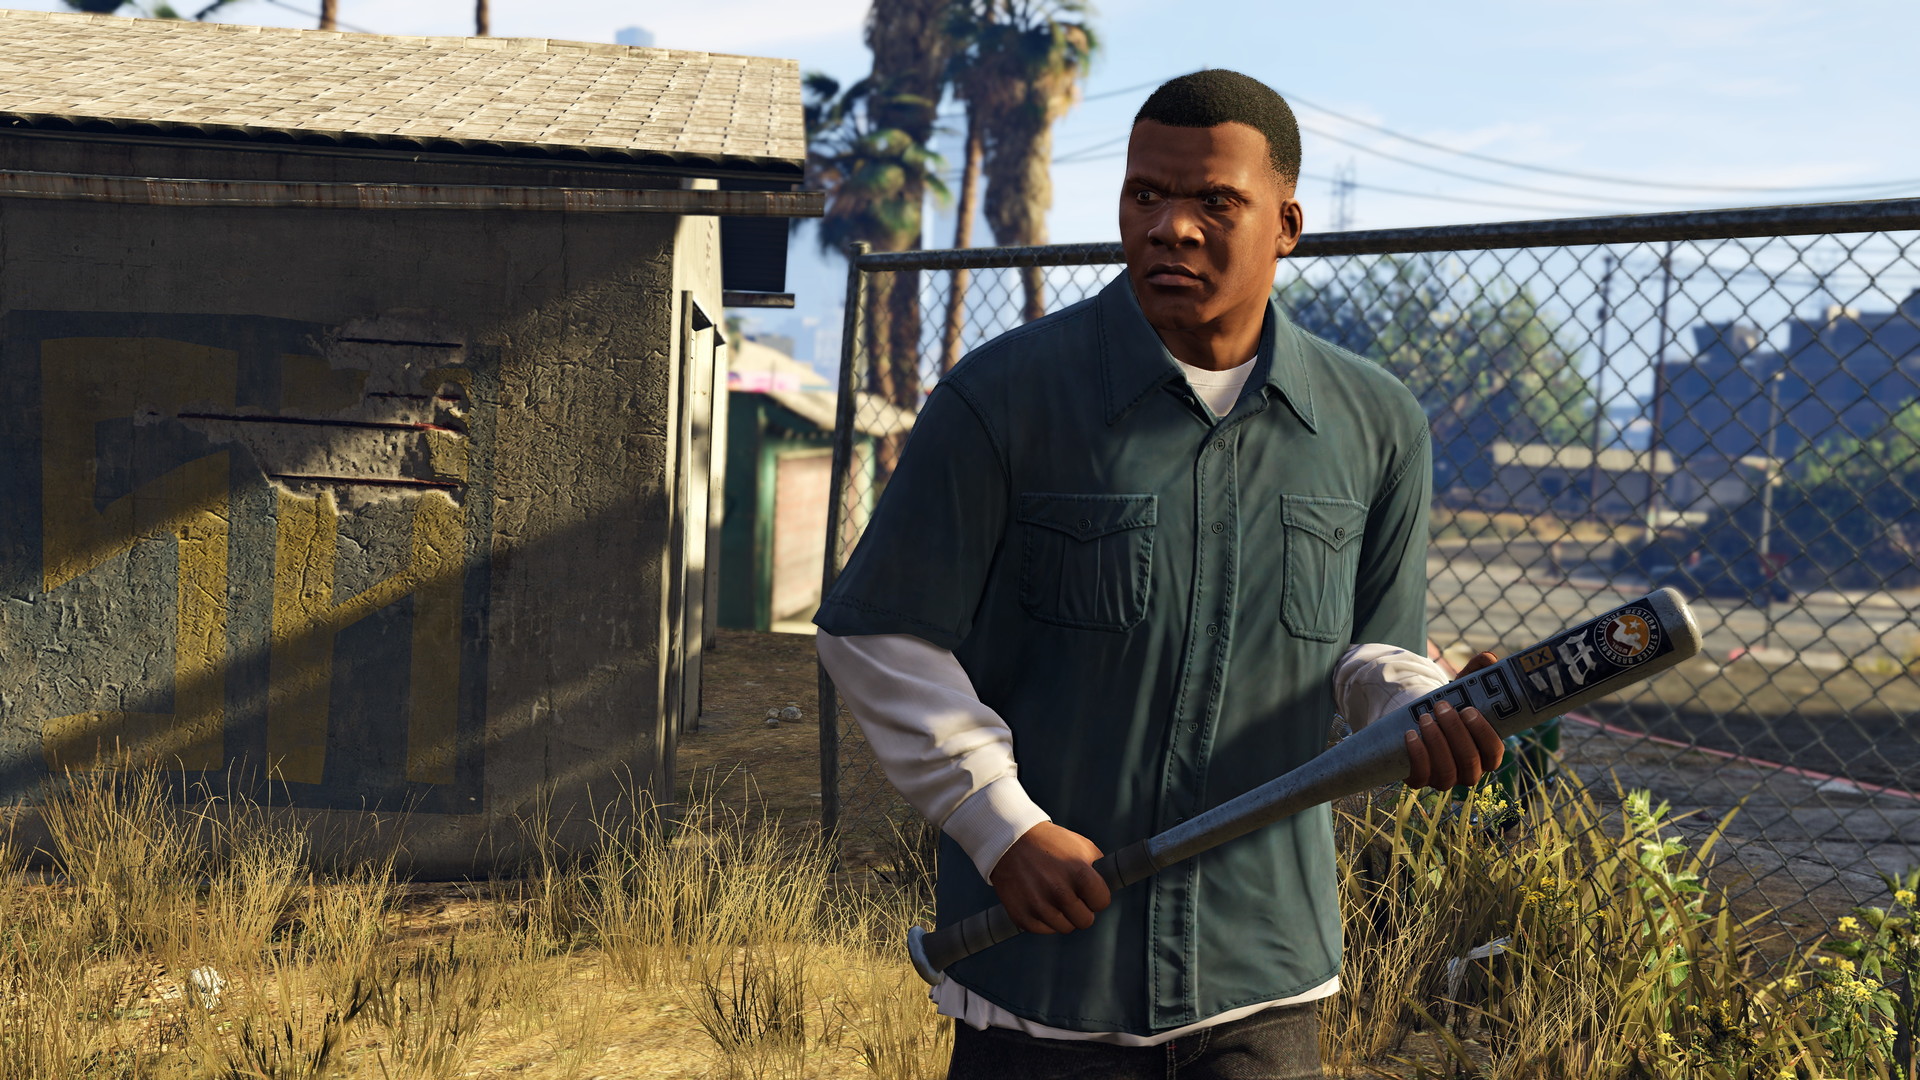 GTA 5 (Online) Update 1.66 Patch Notes